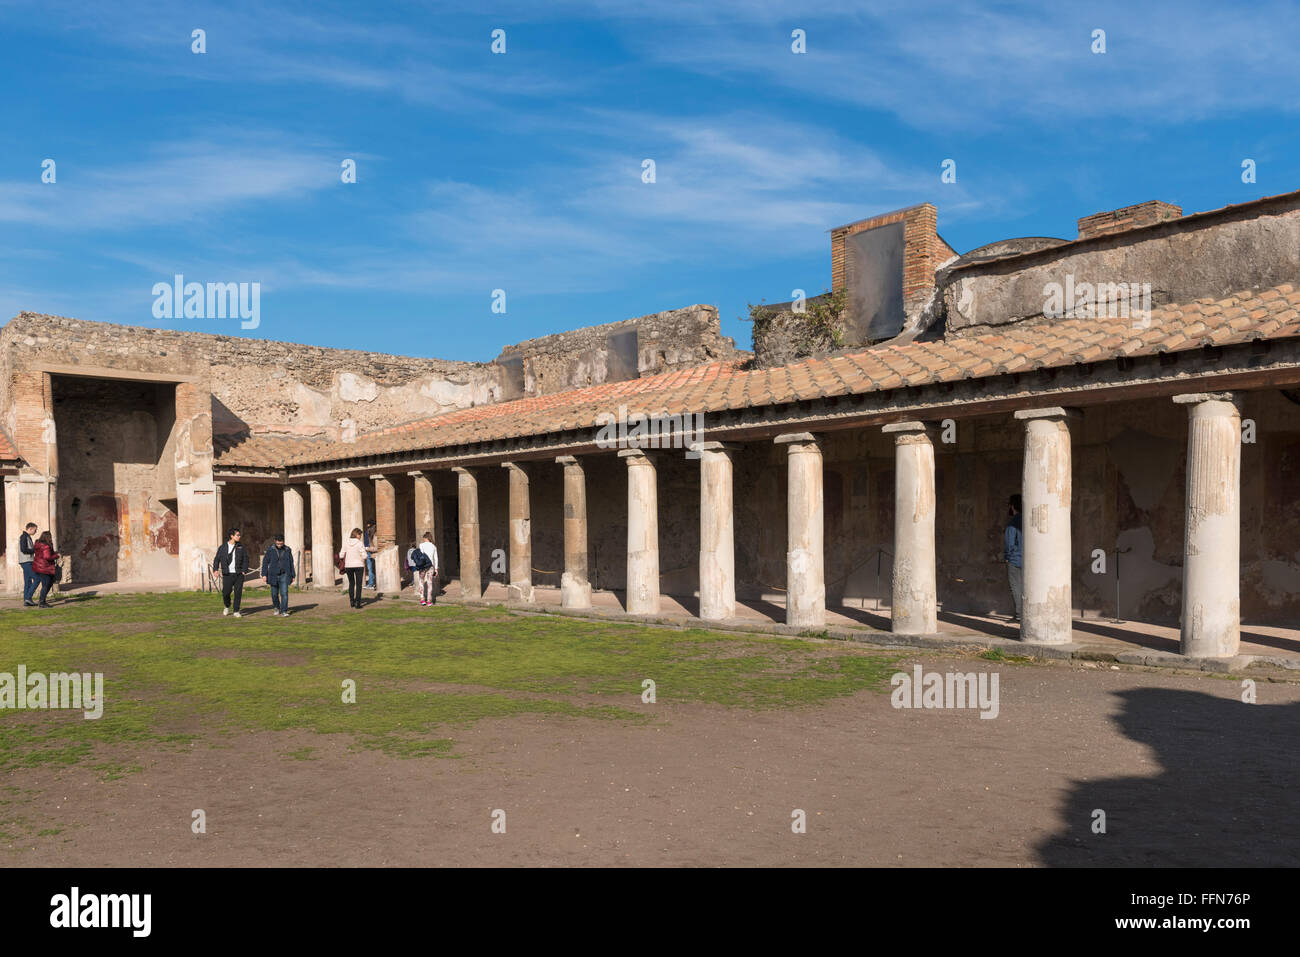 Tourists at the Pompeii ruins of the ancient Roman city in Italy, Europe Stock Photo